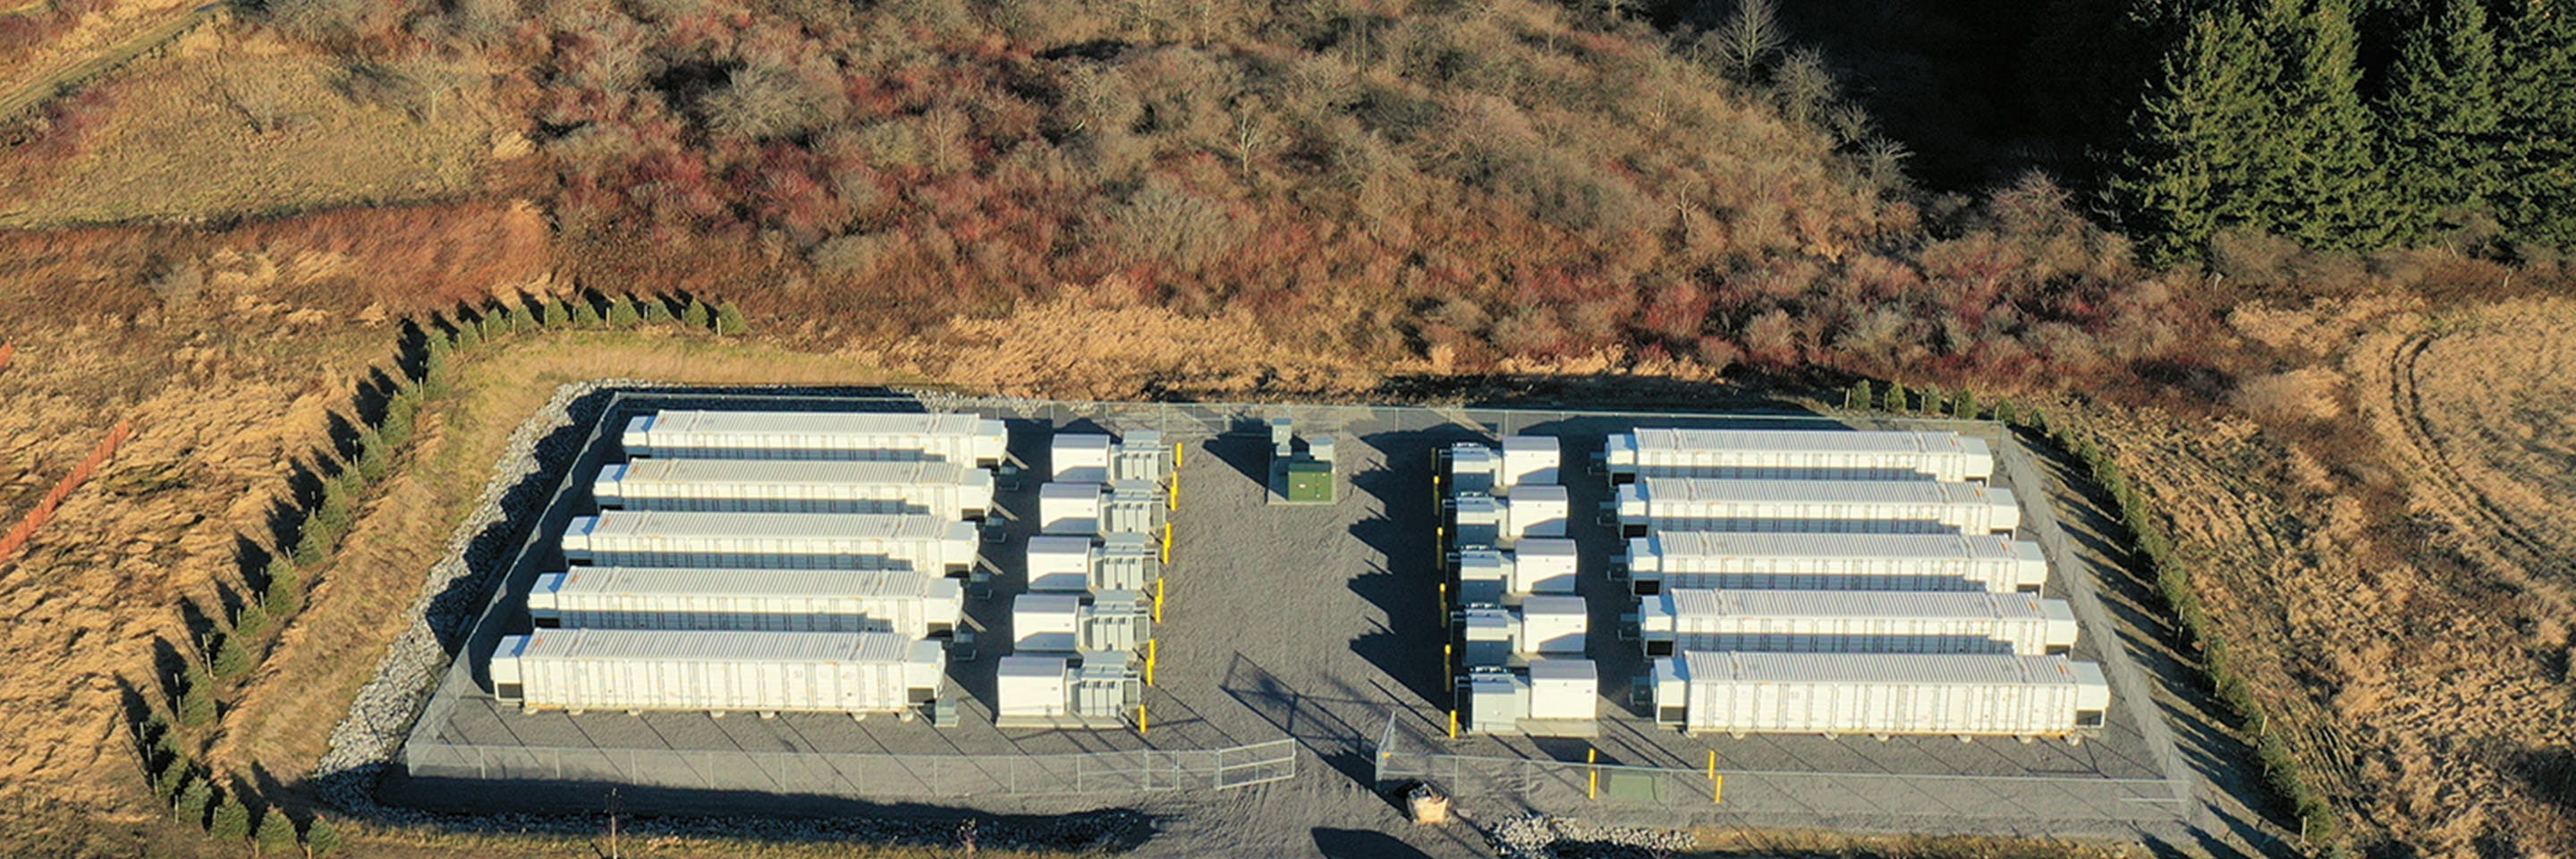 Invenergy’s energy storage and co-location expertise brings greater stability to the NYISO power grid.